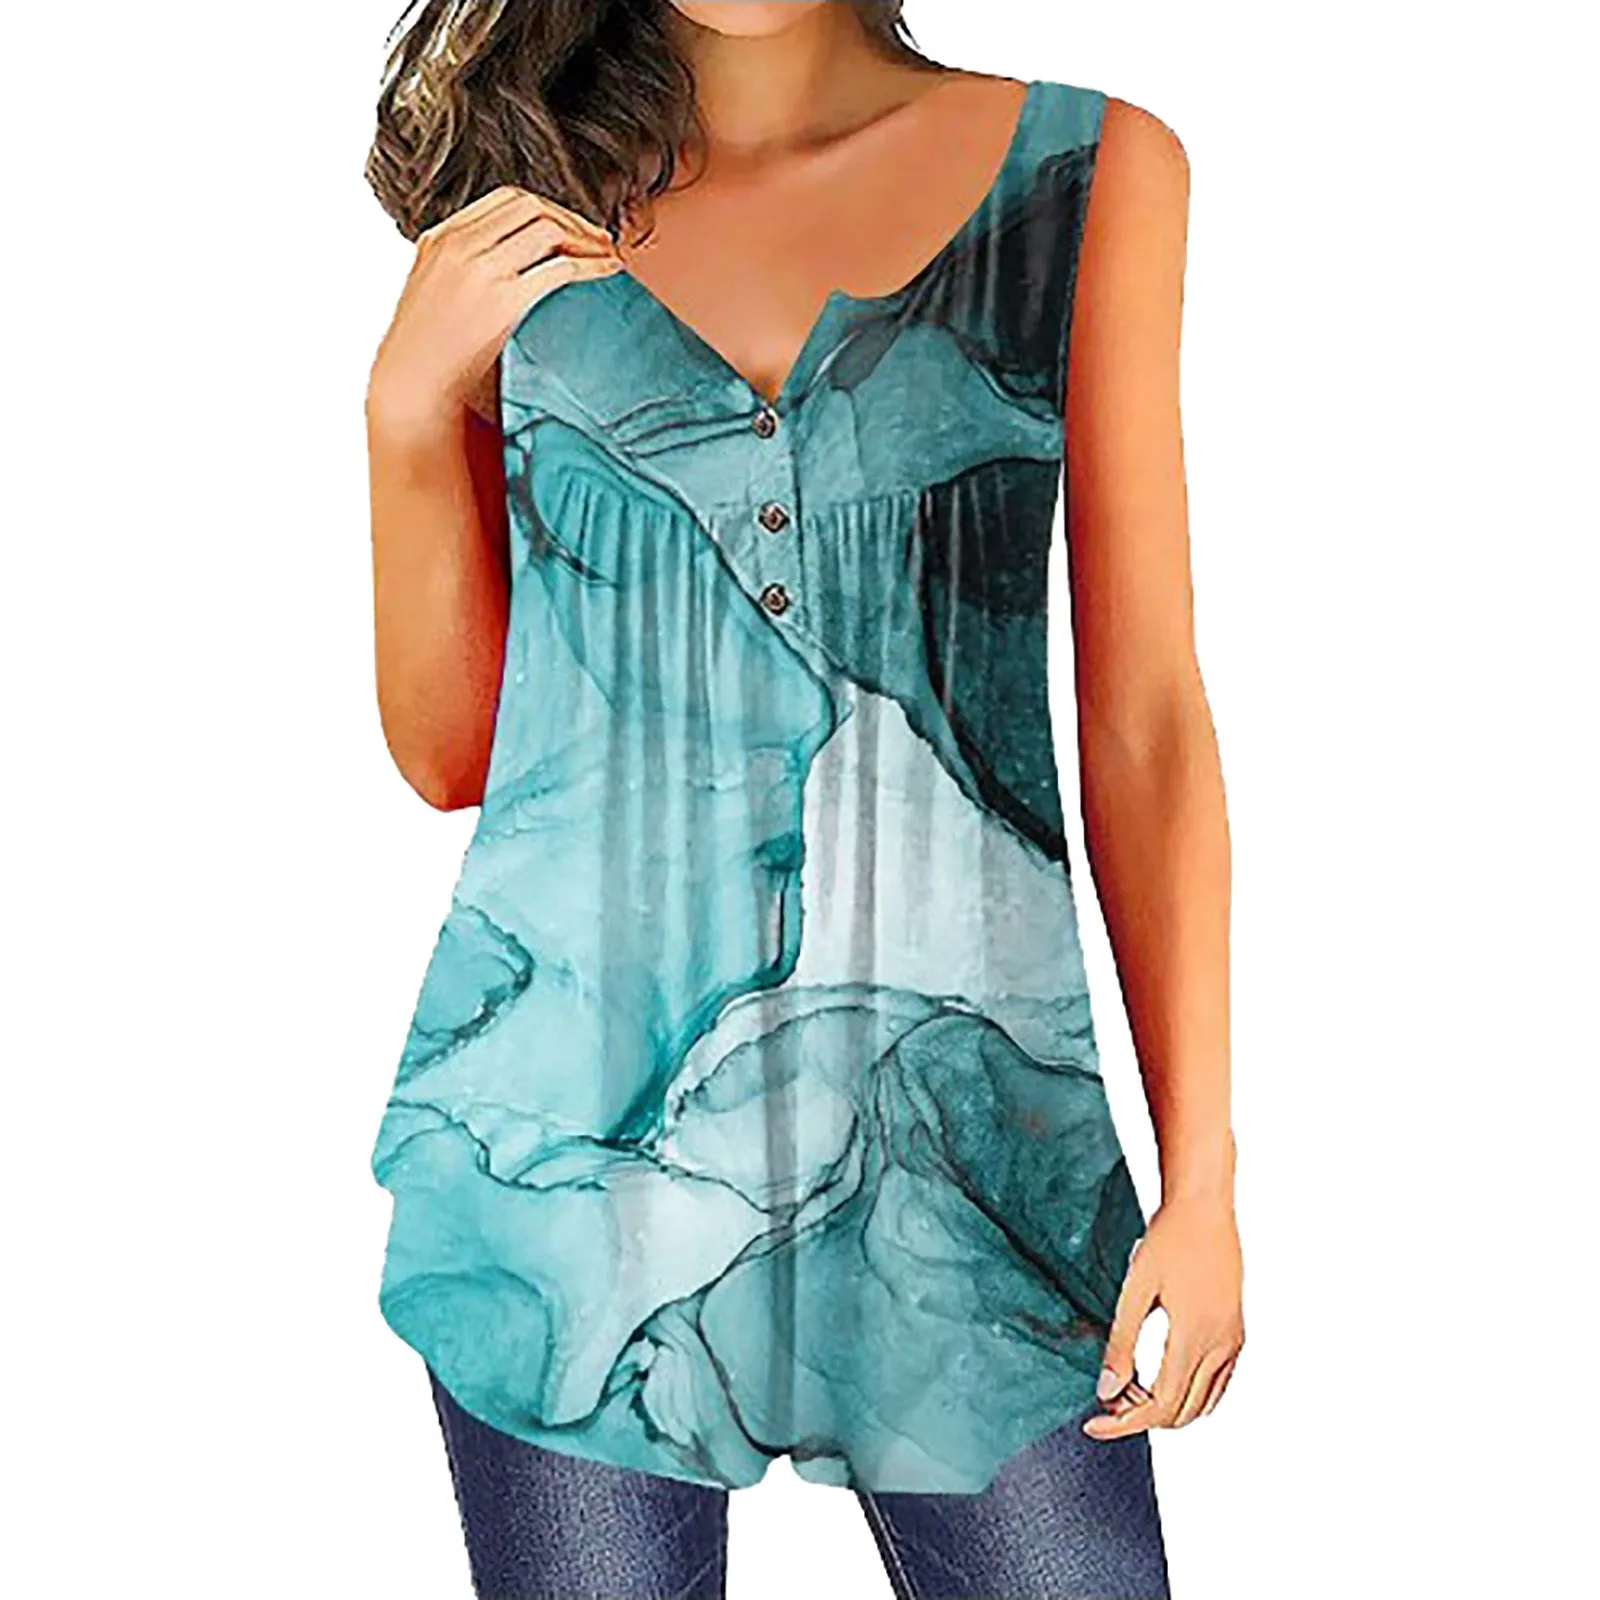 

Ladies Summer Casual Tank Tops Women 3D Sleeveless Printed Vest With Buttons Teens 90s Loose Fit Henley Flowy Tanks Street Wear